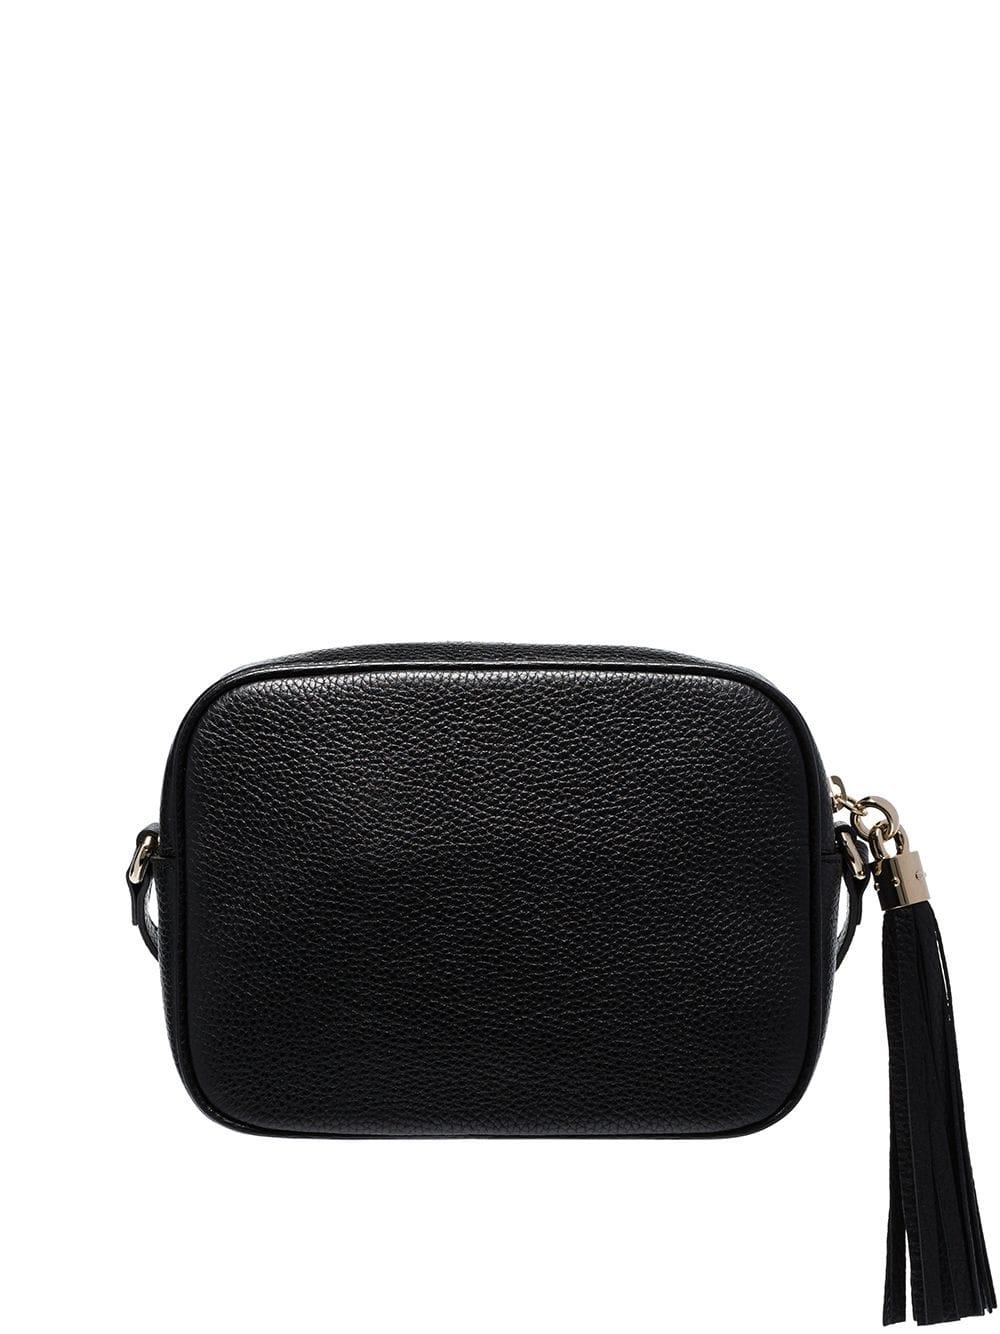 Gucci Leather Small Soho Disco Shoulder Bag in Black - Lyst